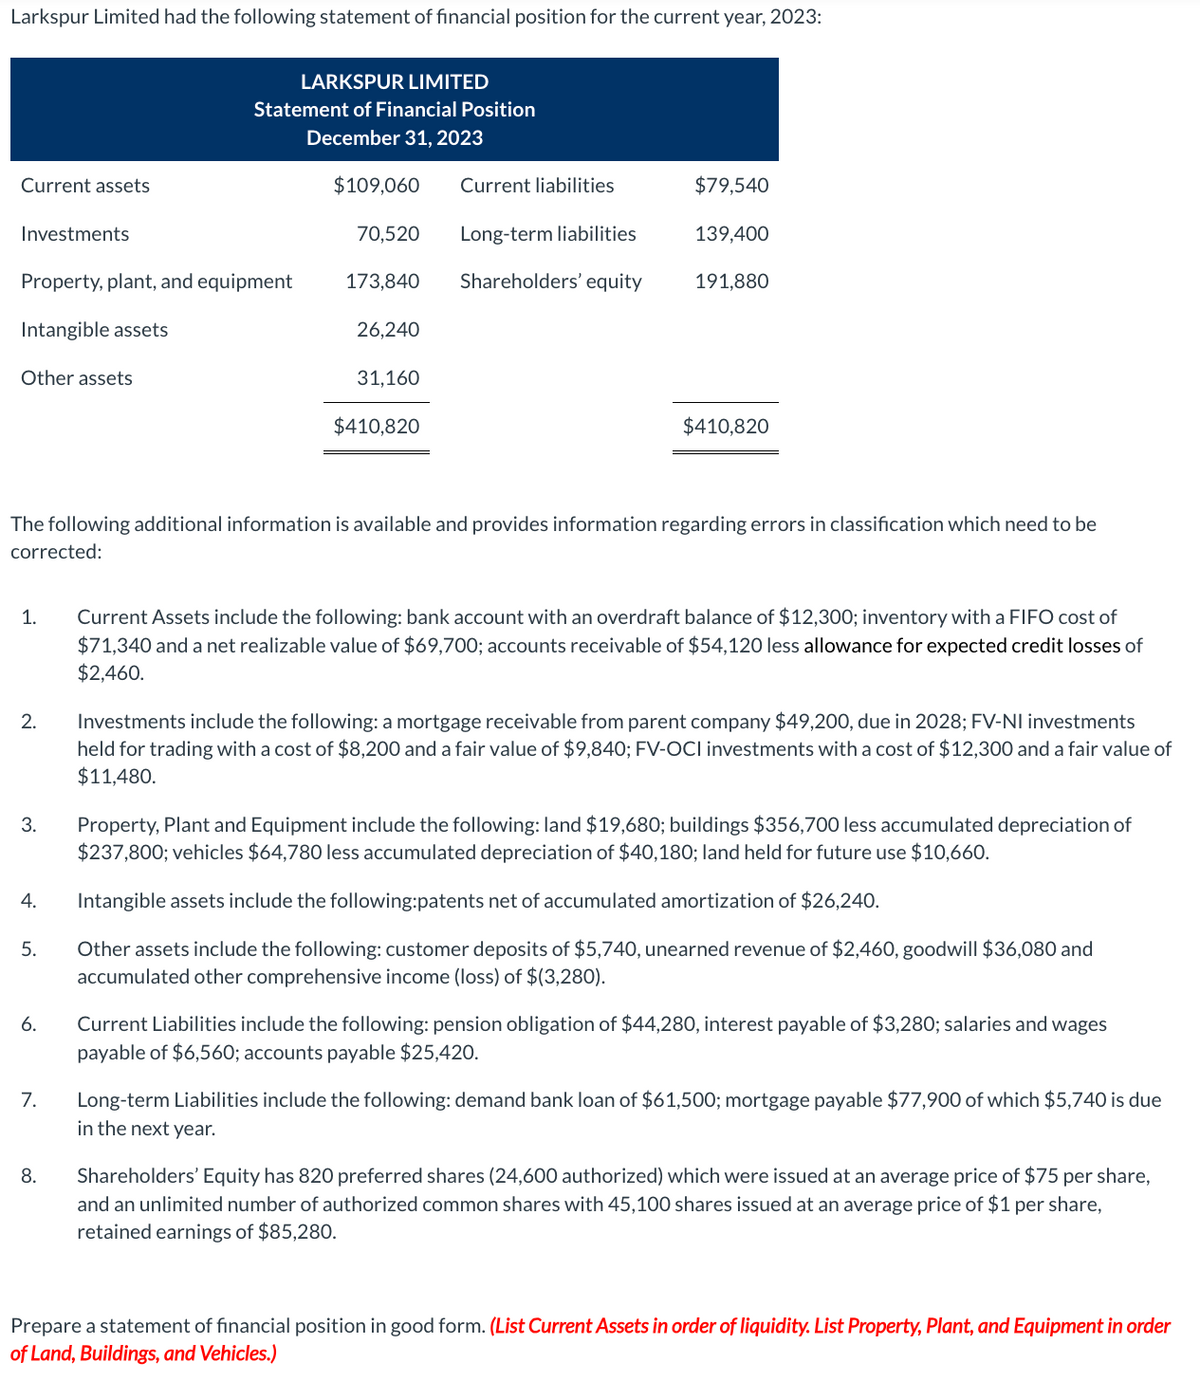 Larkspur Limited had the following statement of financial position for the current year, 2023:
Current assets
Investments
Property, plant, and equipment
Intangible assets
Other assets
1.
2.
3.
4.
5.
6.
LARKSPUR LIMITED
Statement of Financial Position
December 31, 2023
7.
8.
$109,060
70,520
173,840
The following additional information is available and provides information regarding errors in classification which need to be
corrected:
26,240
31,160
$410,820
Current liabilities
Long-term liabilities
Shareholders' equity
$79,540
139,400
191,880
$410,820
Current Assets include the following: bank account with an overdraft balance of $12,300; inventory with a FIFO cost of
$71,340 and a net realizable value of $69,700; accounts receivable of $54,120 less allowance for expected credit losses of
$2,460.
Investments include the following: a mortgage receivable from parent company $49,200, due in 2028; FV-NI investments
held for trading with a cost of $8,200 and a fair value of $9,840; FV-OCI investments with a cost of $12,300 and a fair value of
$11,480.
Property, Plant and Equipment include the following: land $19,680; buildings $356,700 less accumulated depreciation of
$237,800; vehicles $64,780 less accumulated depreciation of $40,180; land held for future use $10,660.
Intangible assets include the following:patents net of accumulated amortization of $26,240.
Other assets include the following: customer deposits of $5,740, unearned revenue of $2,460, goodwill $36,080 and
accumulated other comprehensive income (loss) of $ (3,280).
Current Liabilities include the following: pension obligation of $44,280, interest payable of $3,280; salaries and wages
payable of $6,560; accounts payable $25,420.
Long-term Liabilities include the following: demand bank loan of $61,500; mortgage payable $77,900 of which $5,740 is due
in the next year.
Shareholders' Equity has 820 preferred shares (24,600 authorized) which were issued at an average price of $75 per share,
and an unlimited number of authorized common shares with 45,100 shares issued at an average price of $1 per share,
retained earnings of $85,280.
Prepare a statement of financial position in good form. (List Current Assets in order of liquidity. List Property, Plant, and Equipment in order
of Land, Buildings, and Vehicles.)